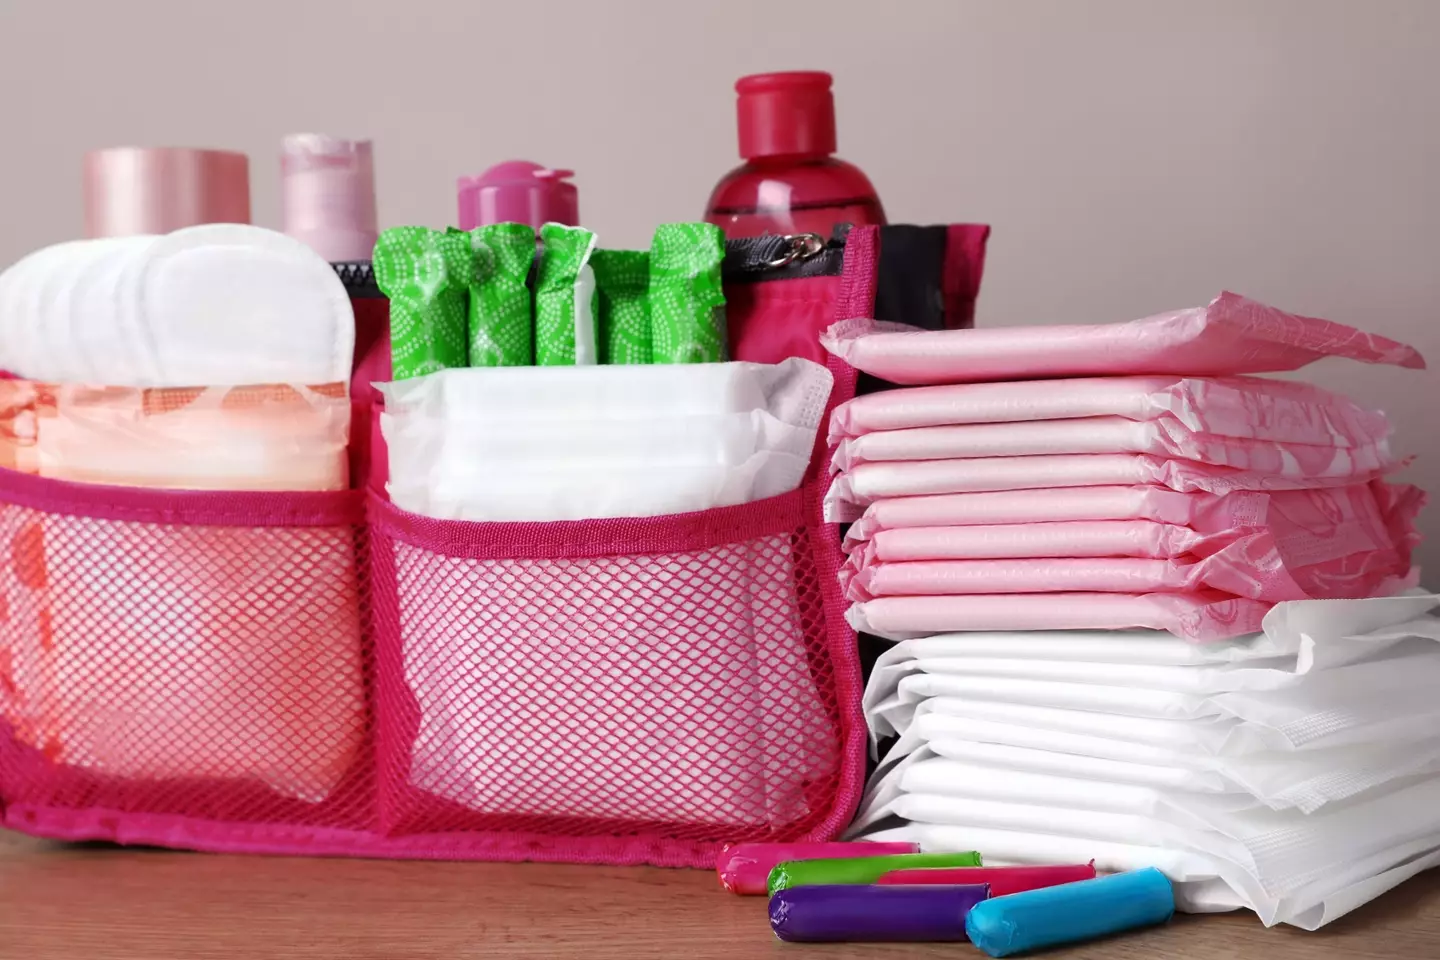 Since 2017, £27m has been spent on providing access to period products in schools.